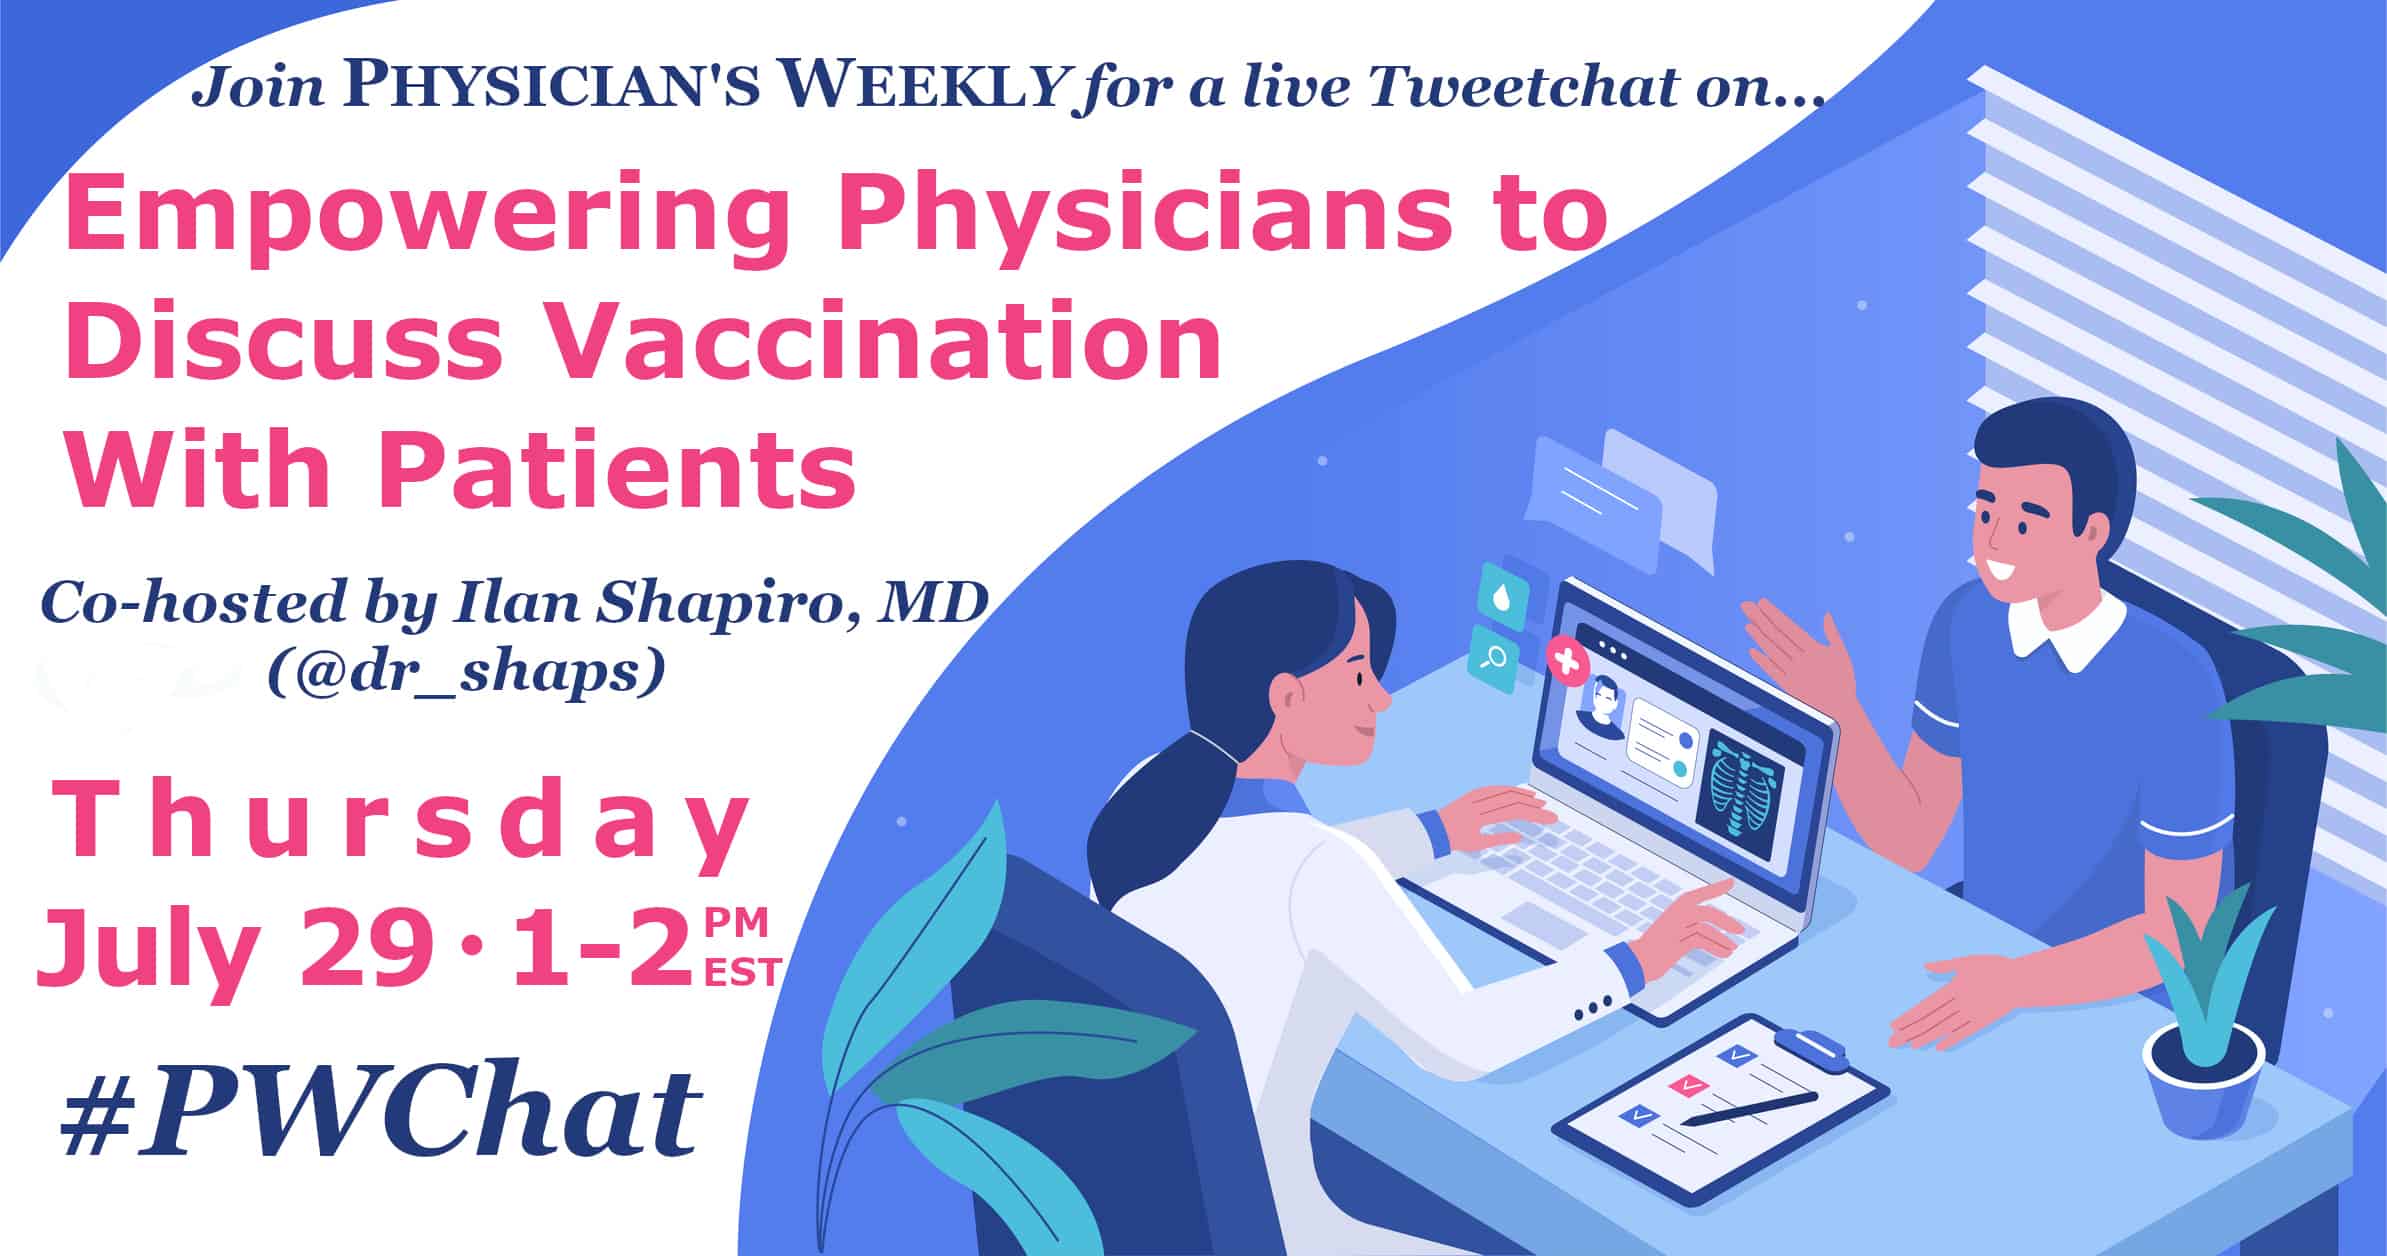 #PWChat Recap: Empowering Physicians to Discuss Vaccination With Patients